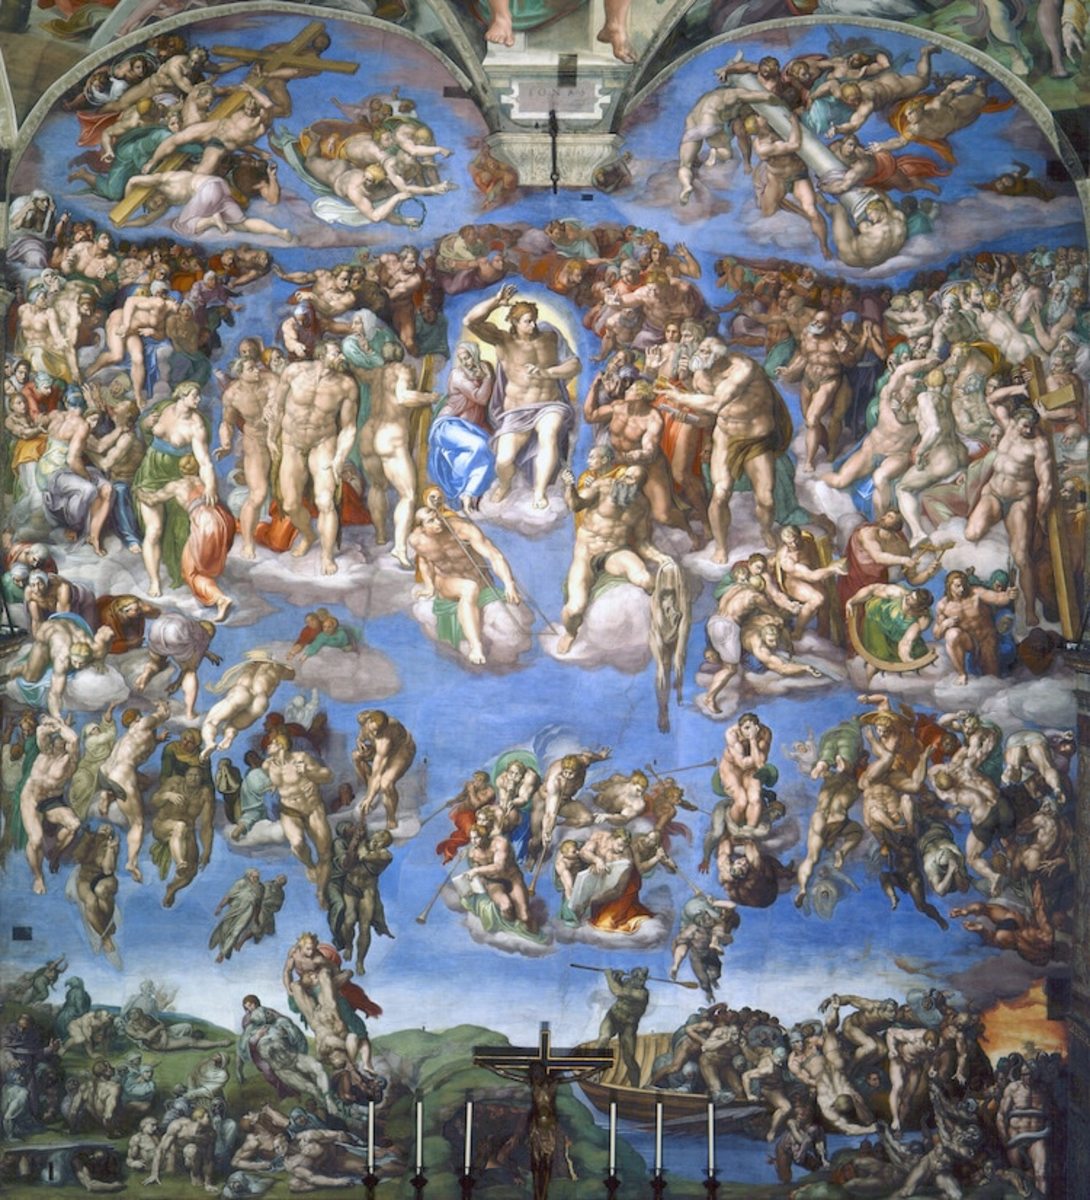 With Over 300 Figures painted, "The Judgement" makes up the Altar Wall of the Sistine Chapel